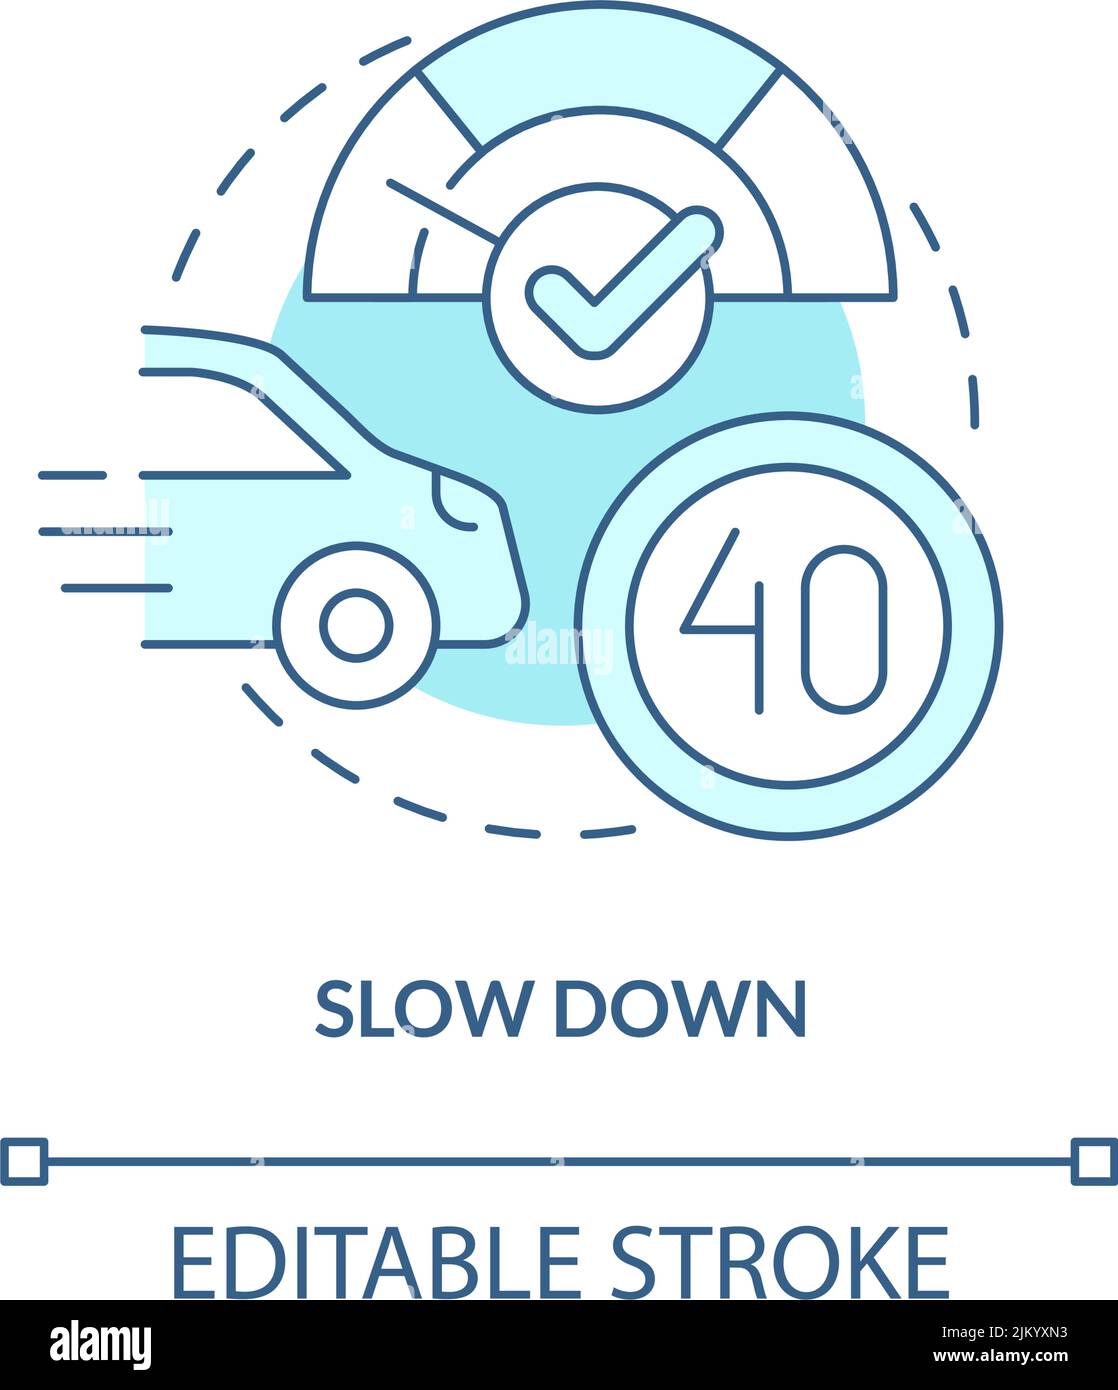 Slow down turquoise concept icon Stock Vector